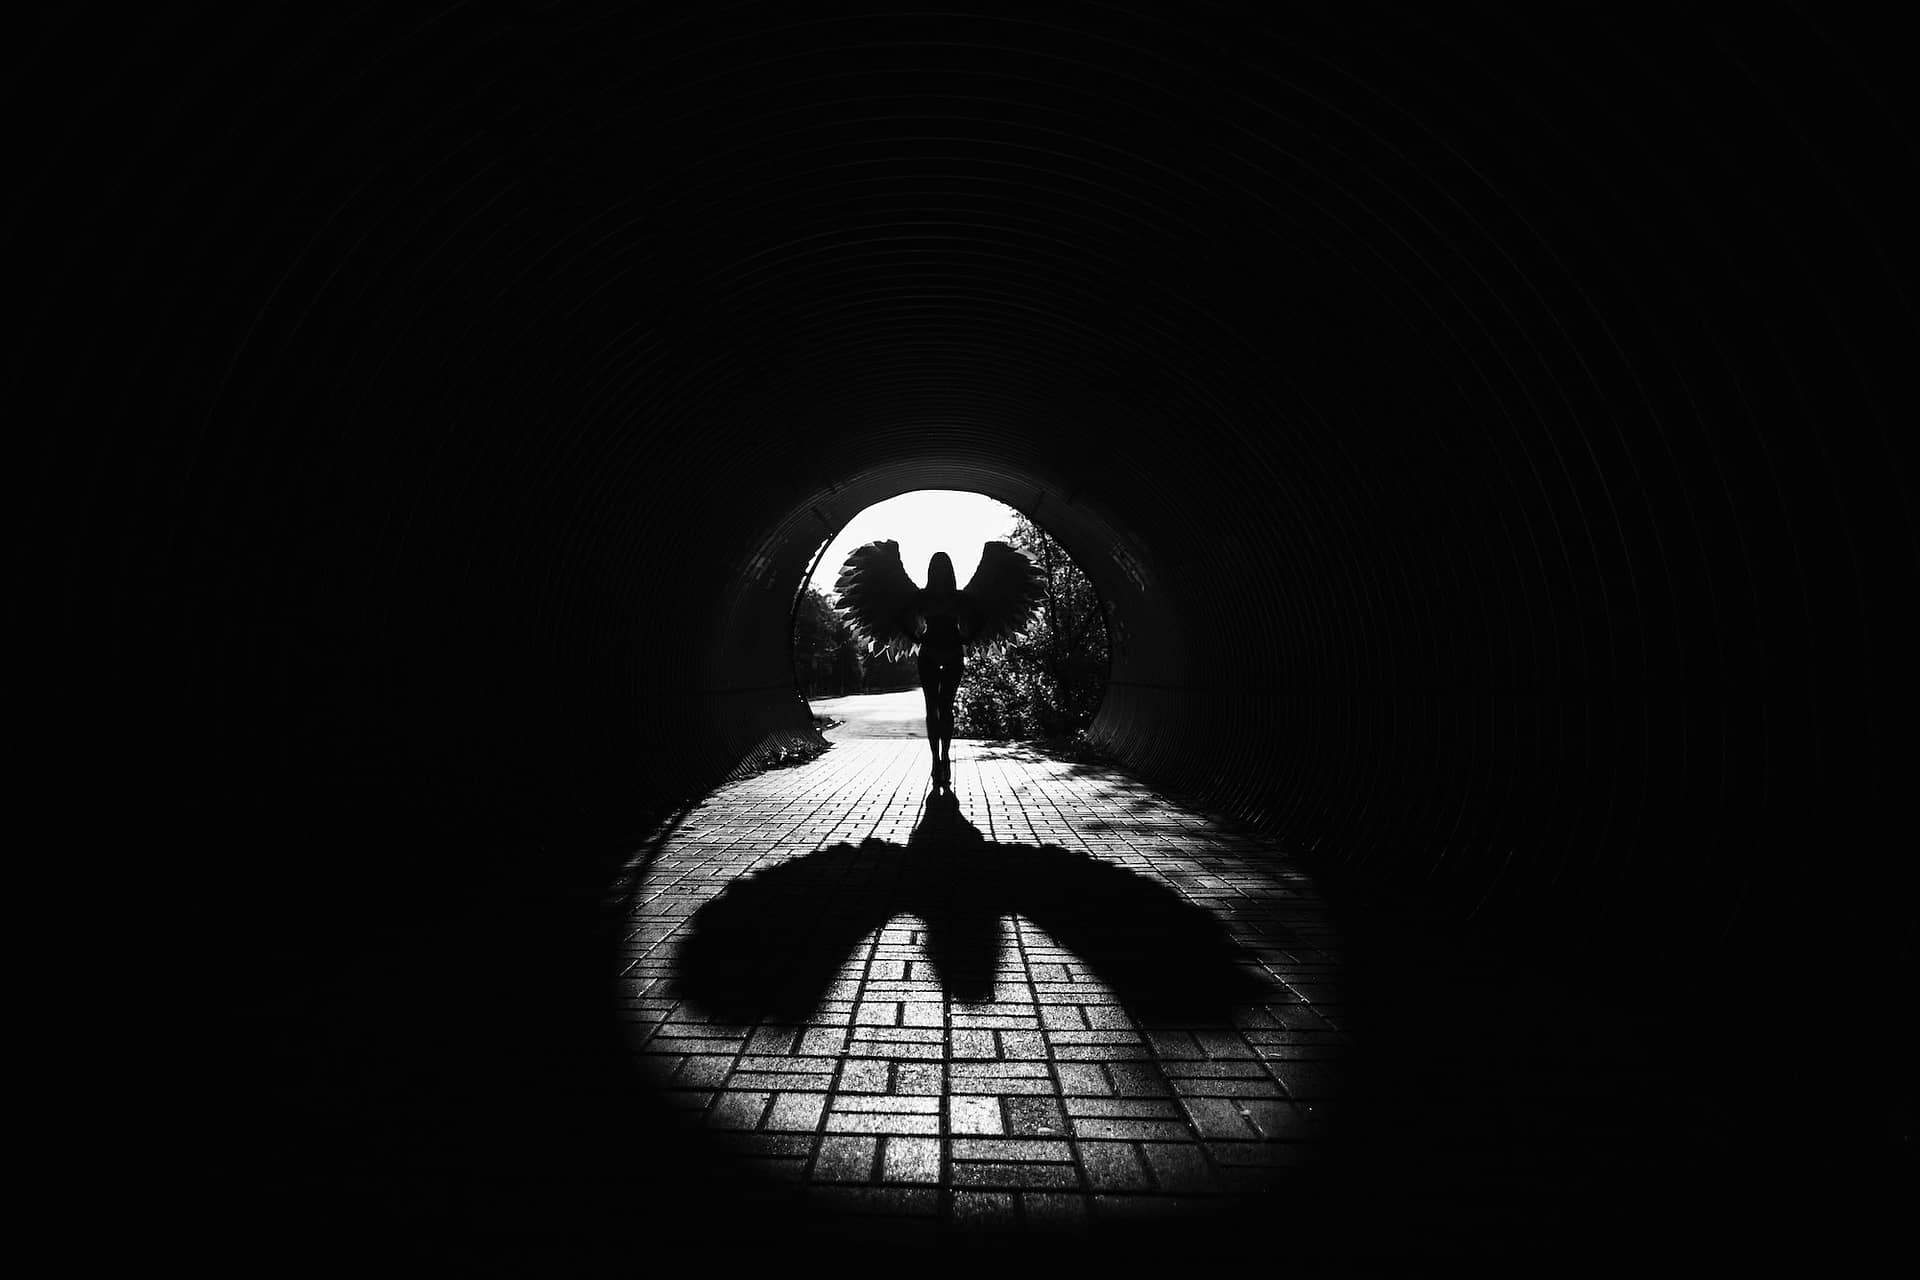 Angel silhouette with shadow in the tunnel